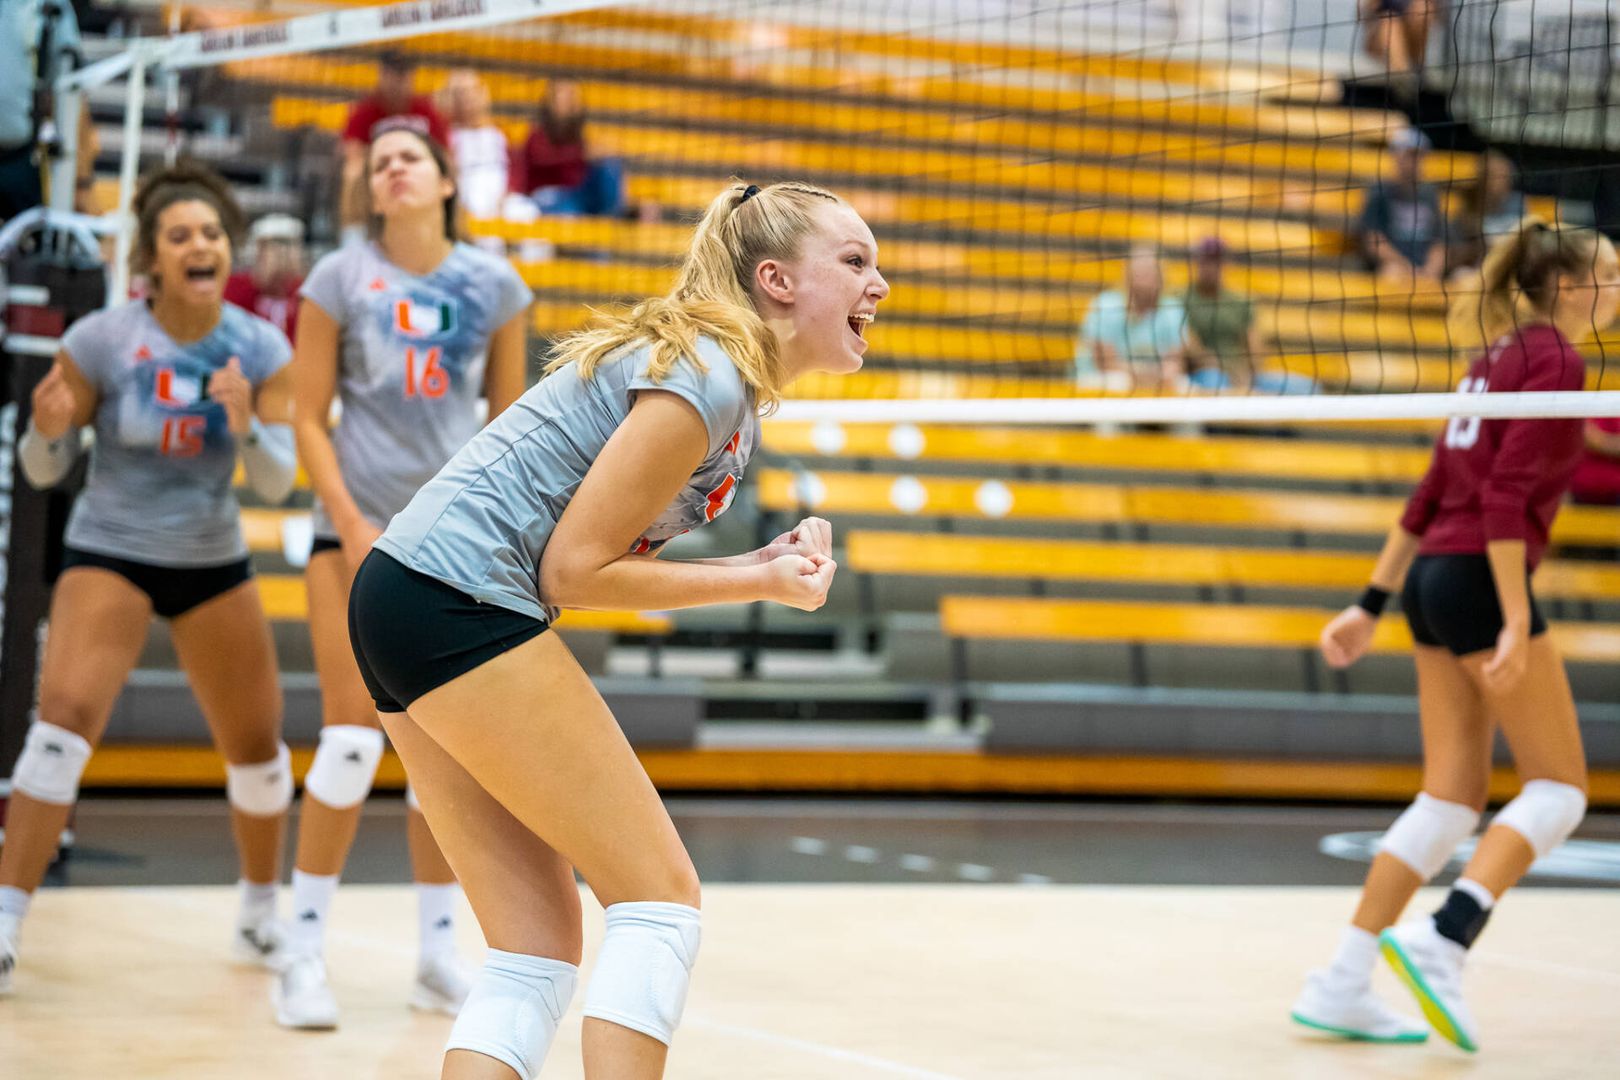 Vach Named ACC Setter of the Week